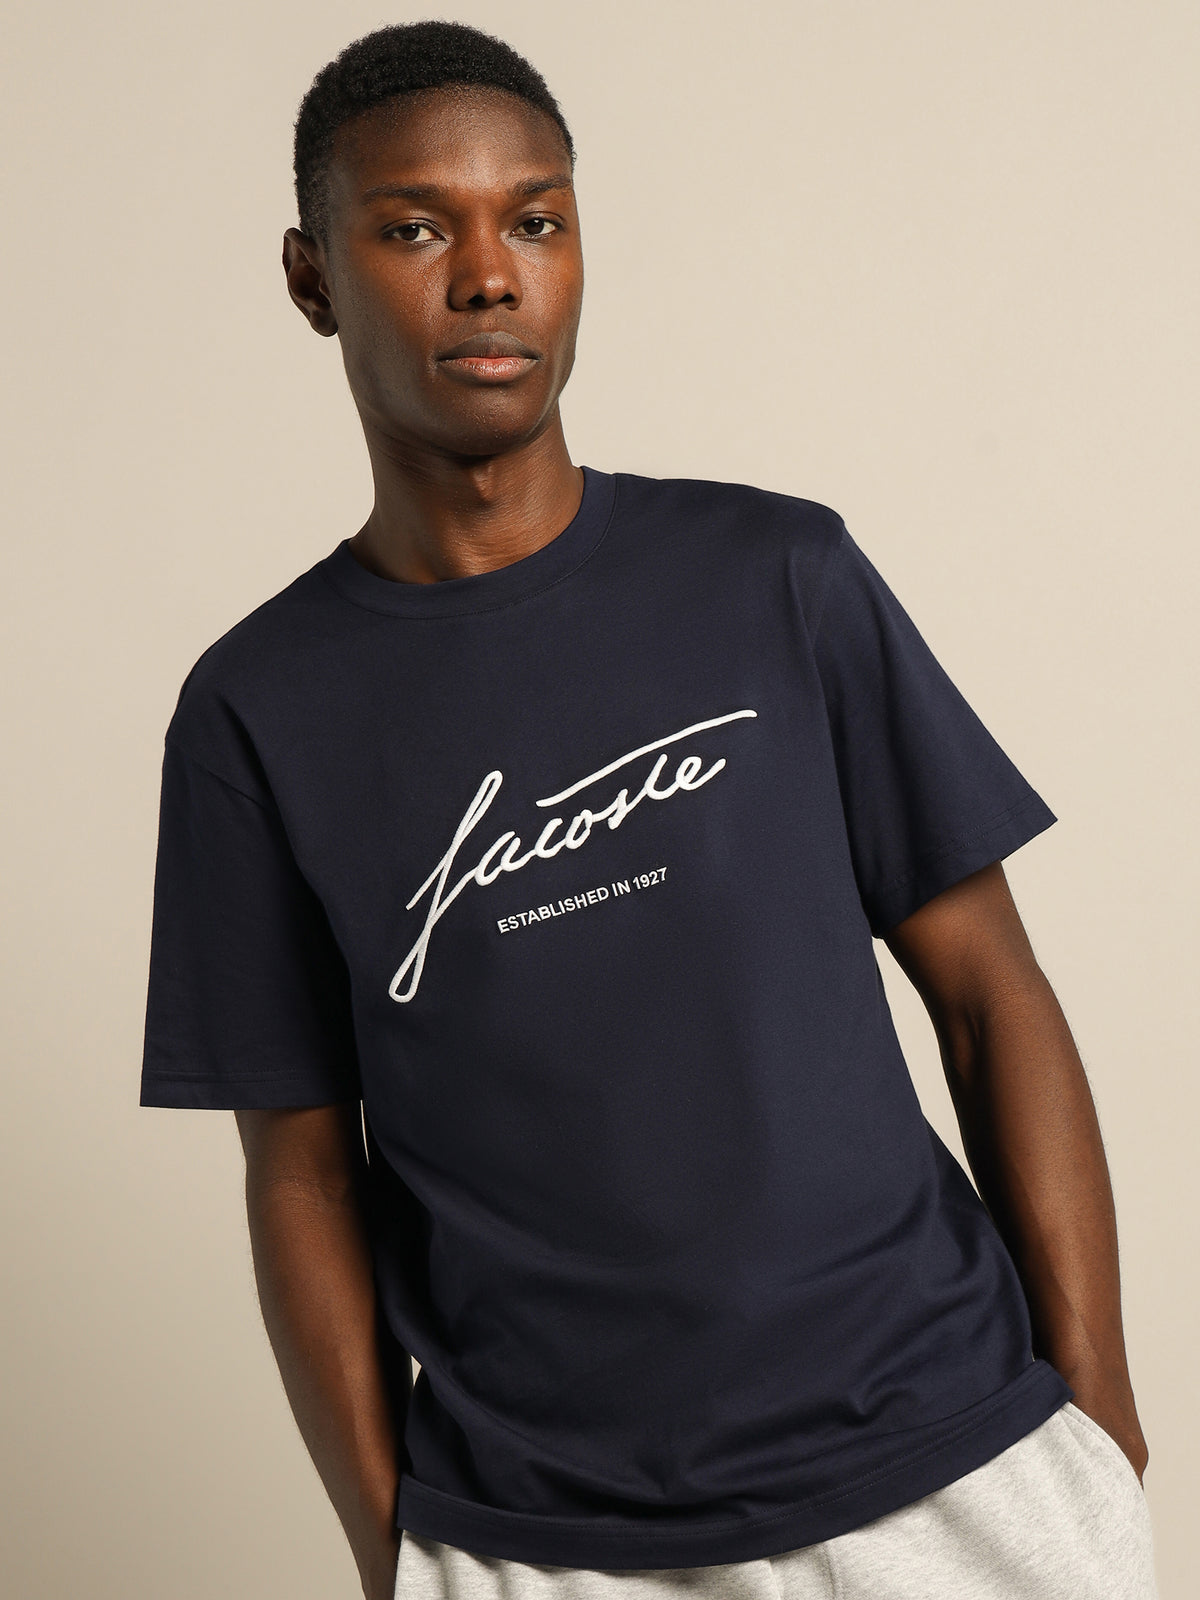 Signature Jersey T-Shirt in Navy